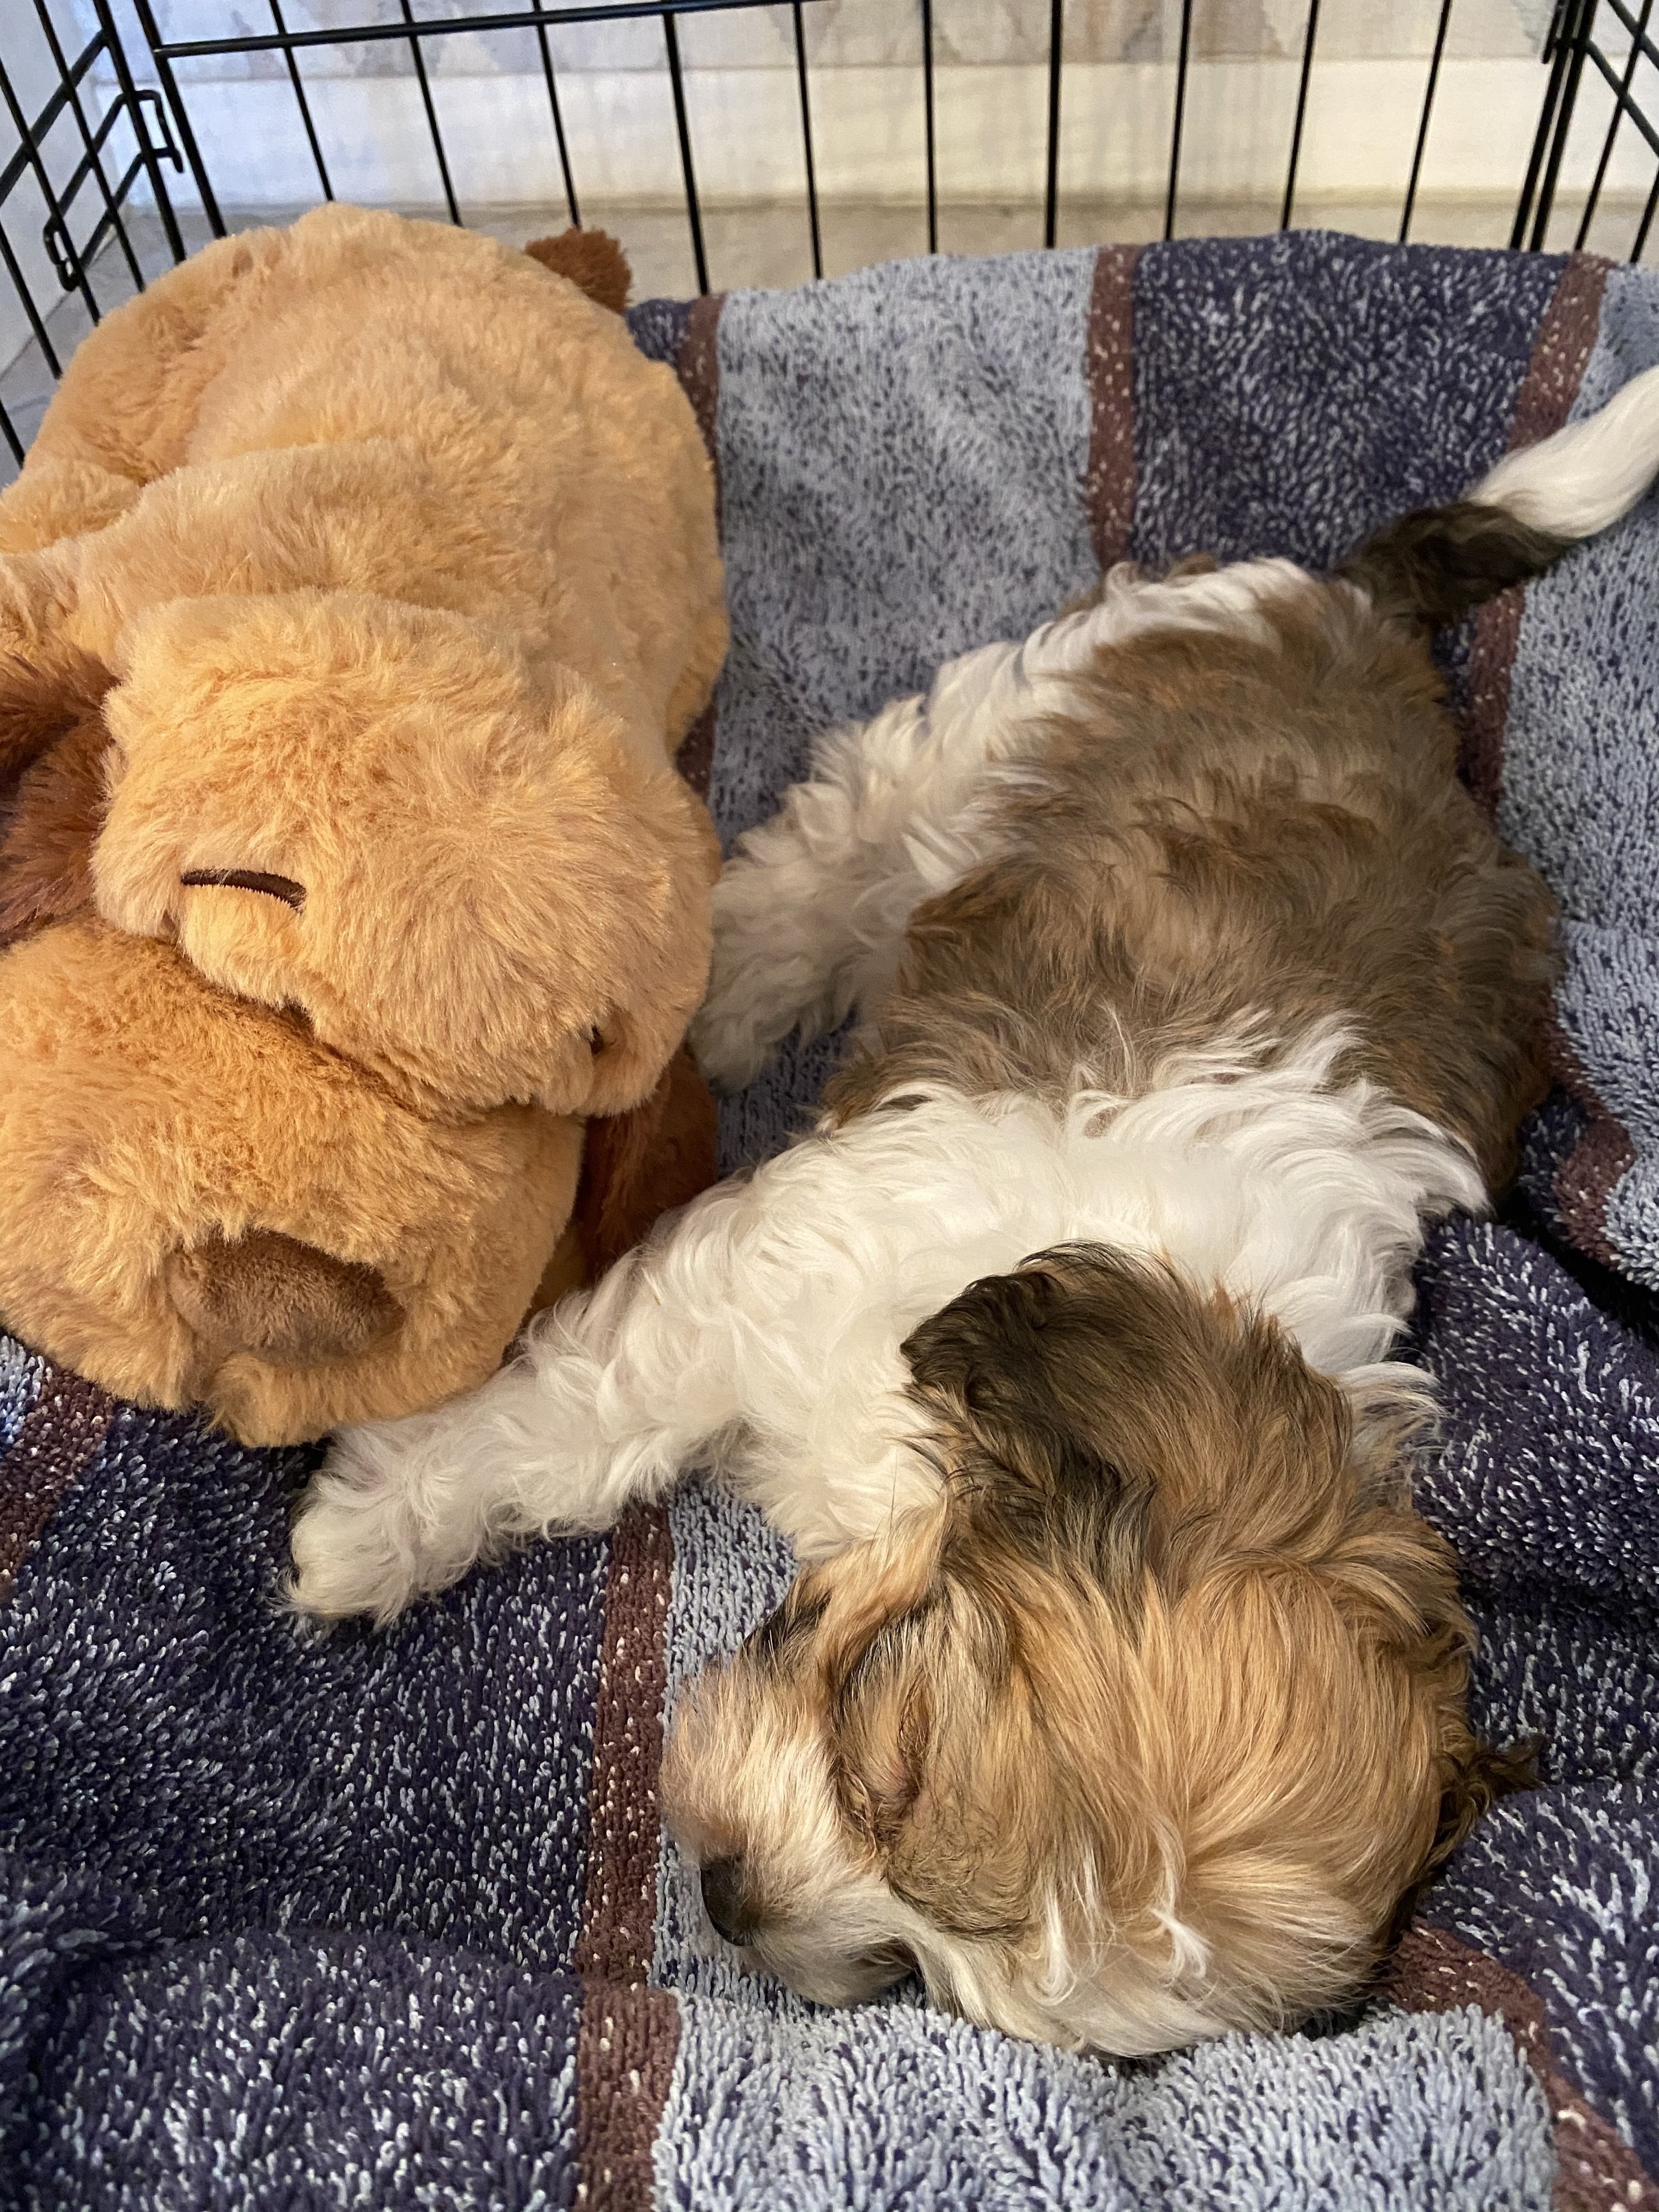 A puppy snuggling with the stuffed Snuggle Puppy 